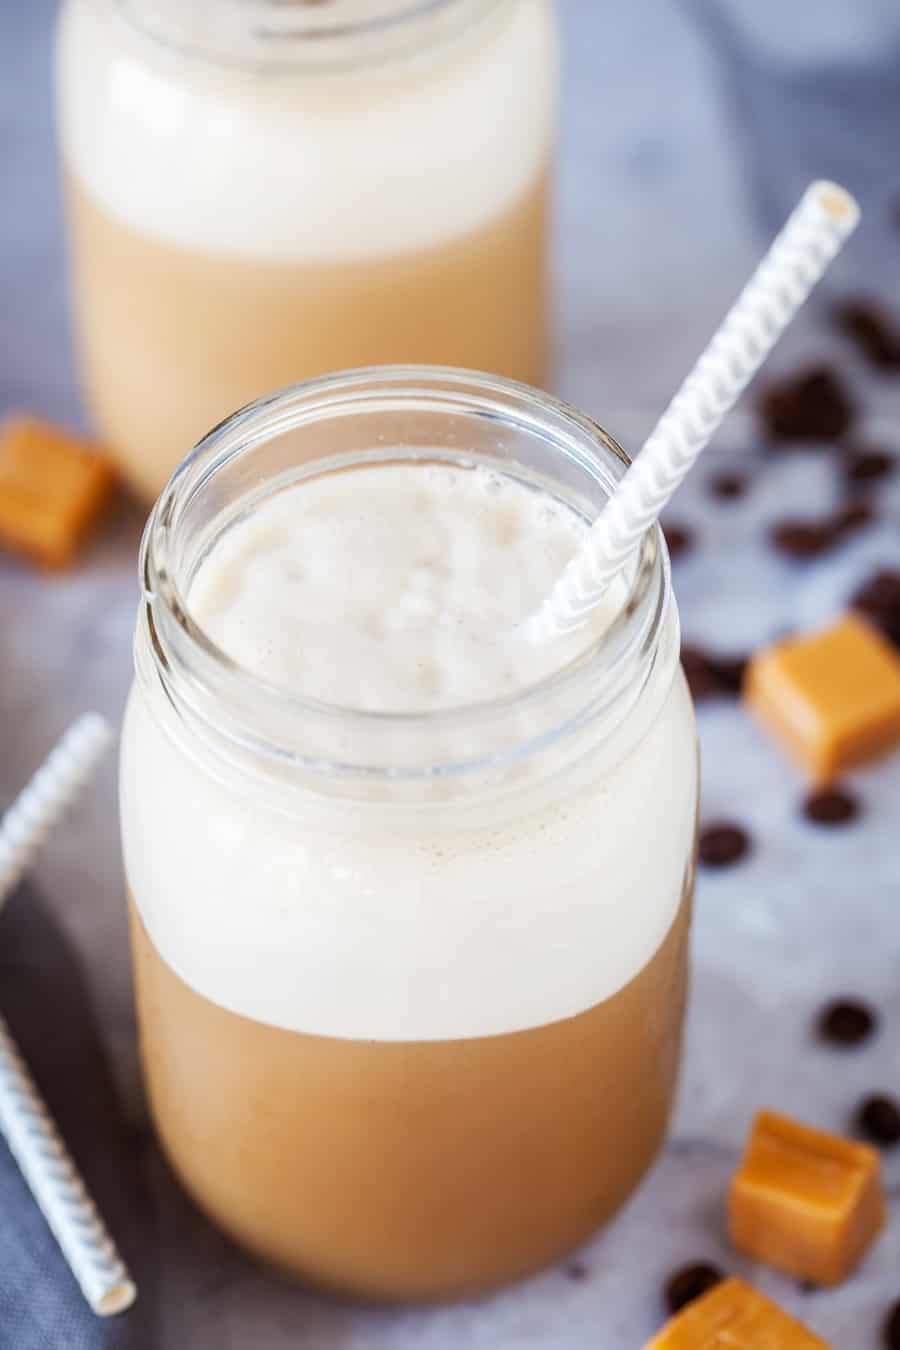 Nothing is more refreshing during summer than a chilled beverage - like this delicious vanilla caramel iced coffee recipe. So easy to make!